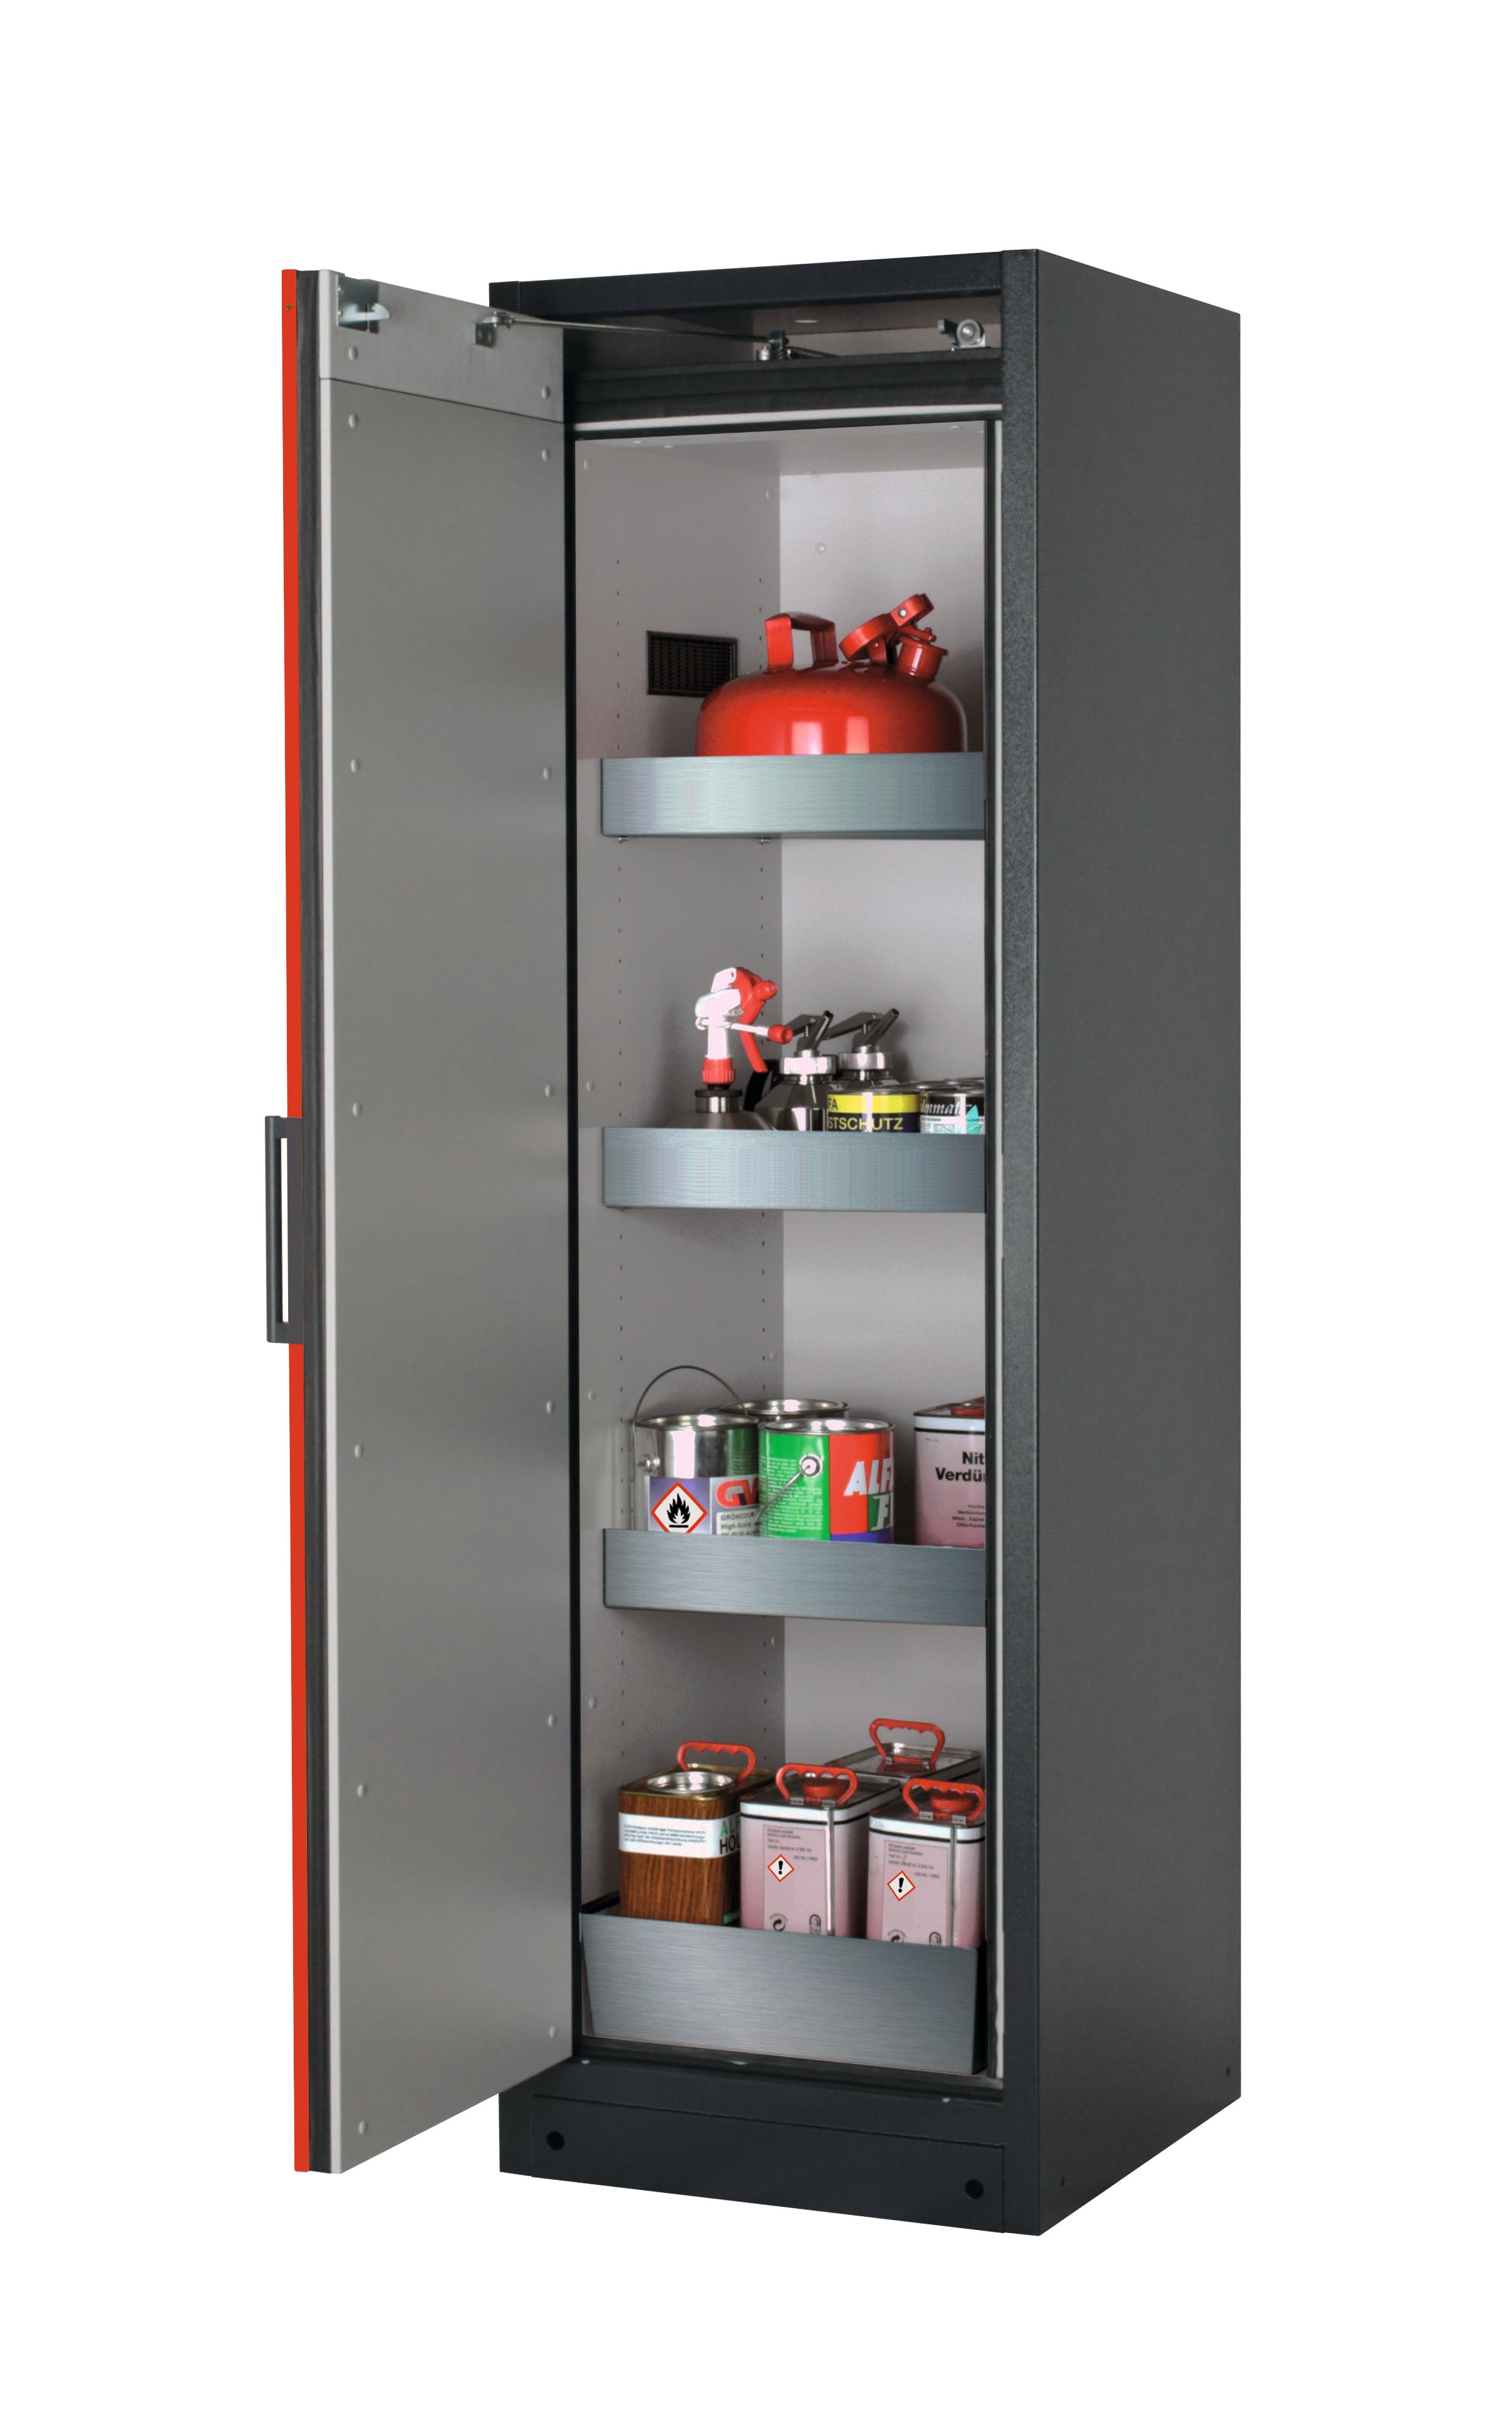 Type 90 safety storage cabinet Q-CLASSIC-90 model Q90.195.060 in traffic red RAL 3020 with 3x tray shelf (standard) (stainless steel 1.4301),